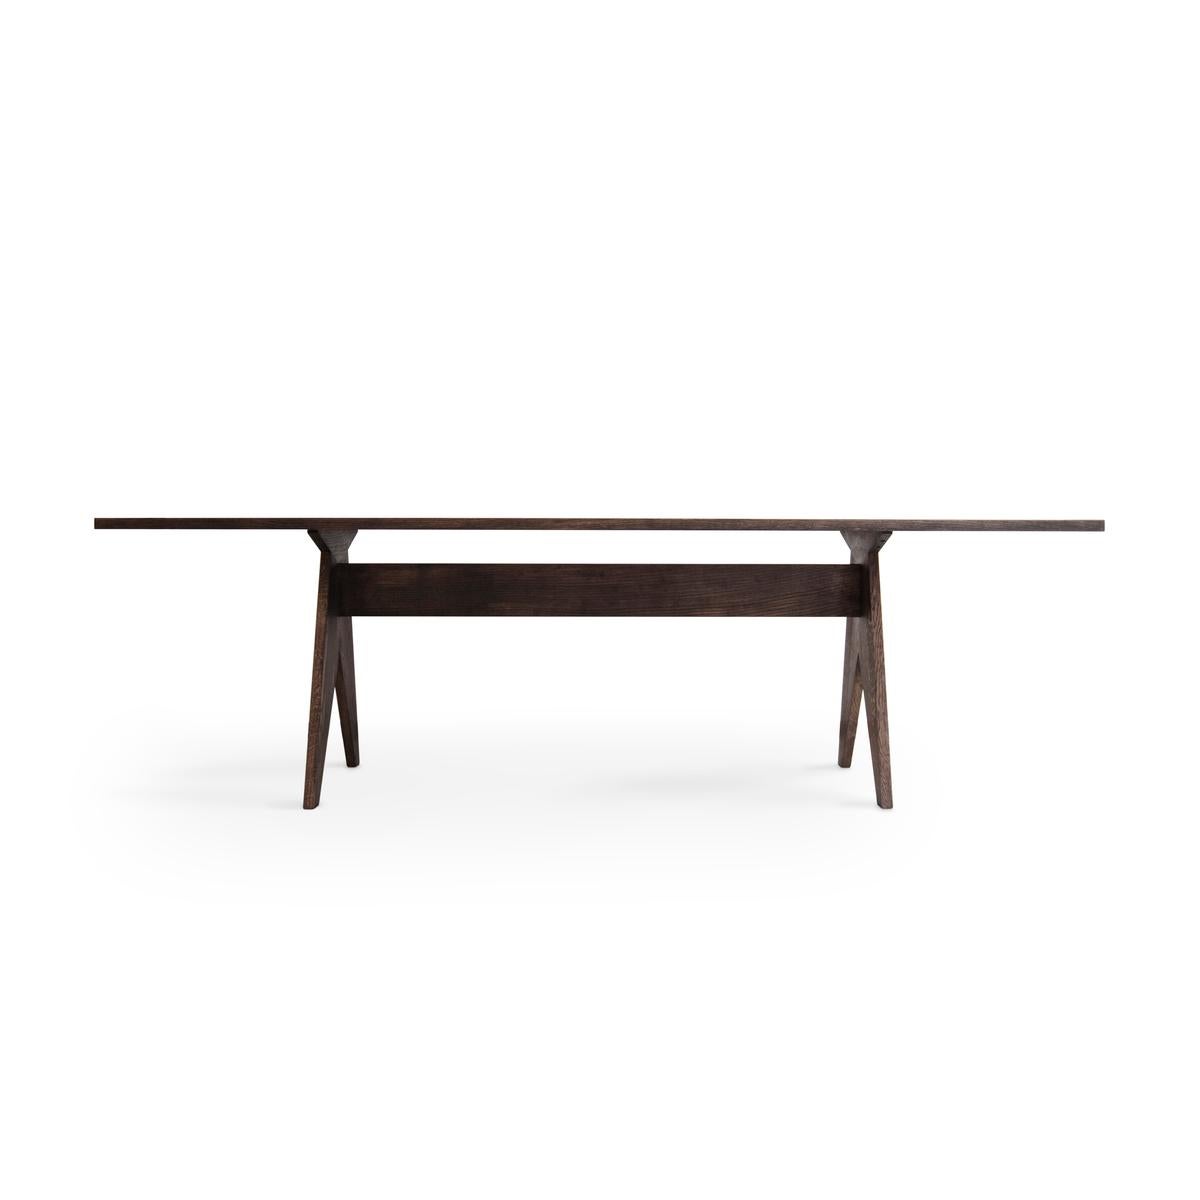 Oak Contemporary Dining Room Table 'POSE', 300, Smoked oak + More Sizes For Sale